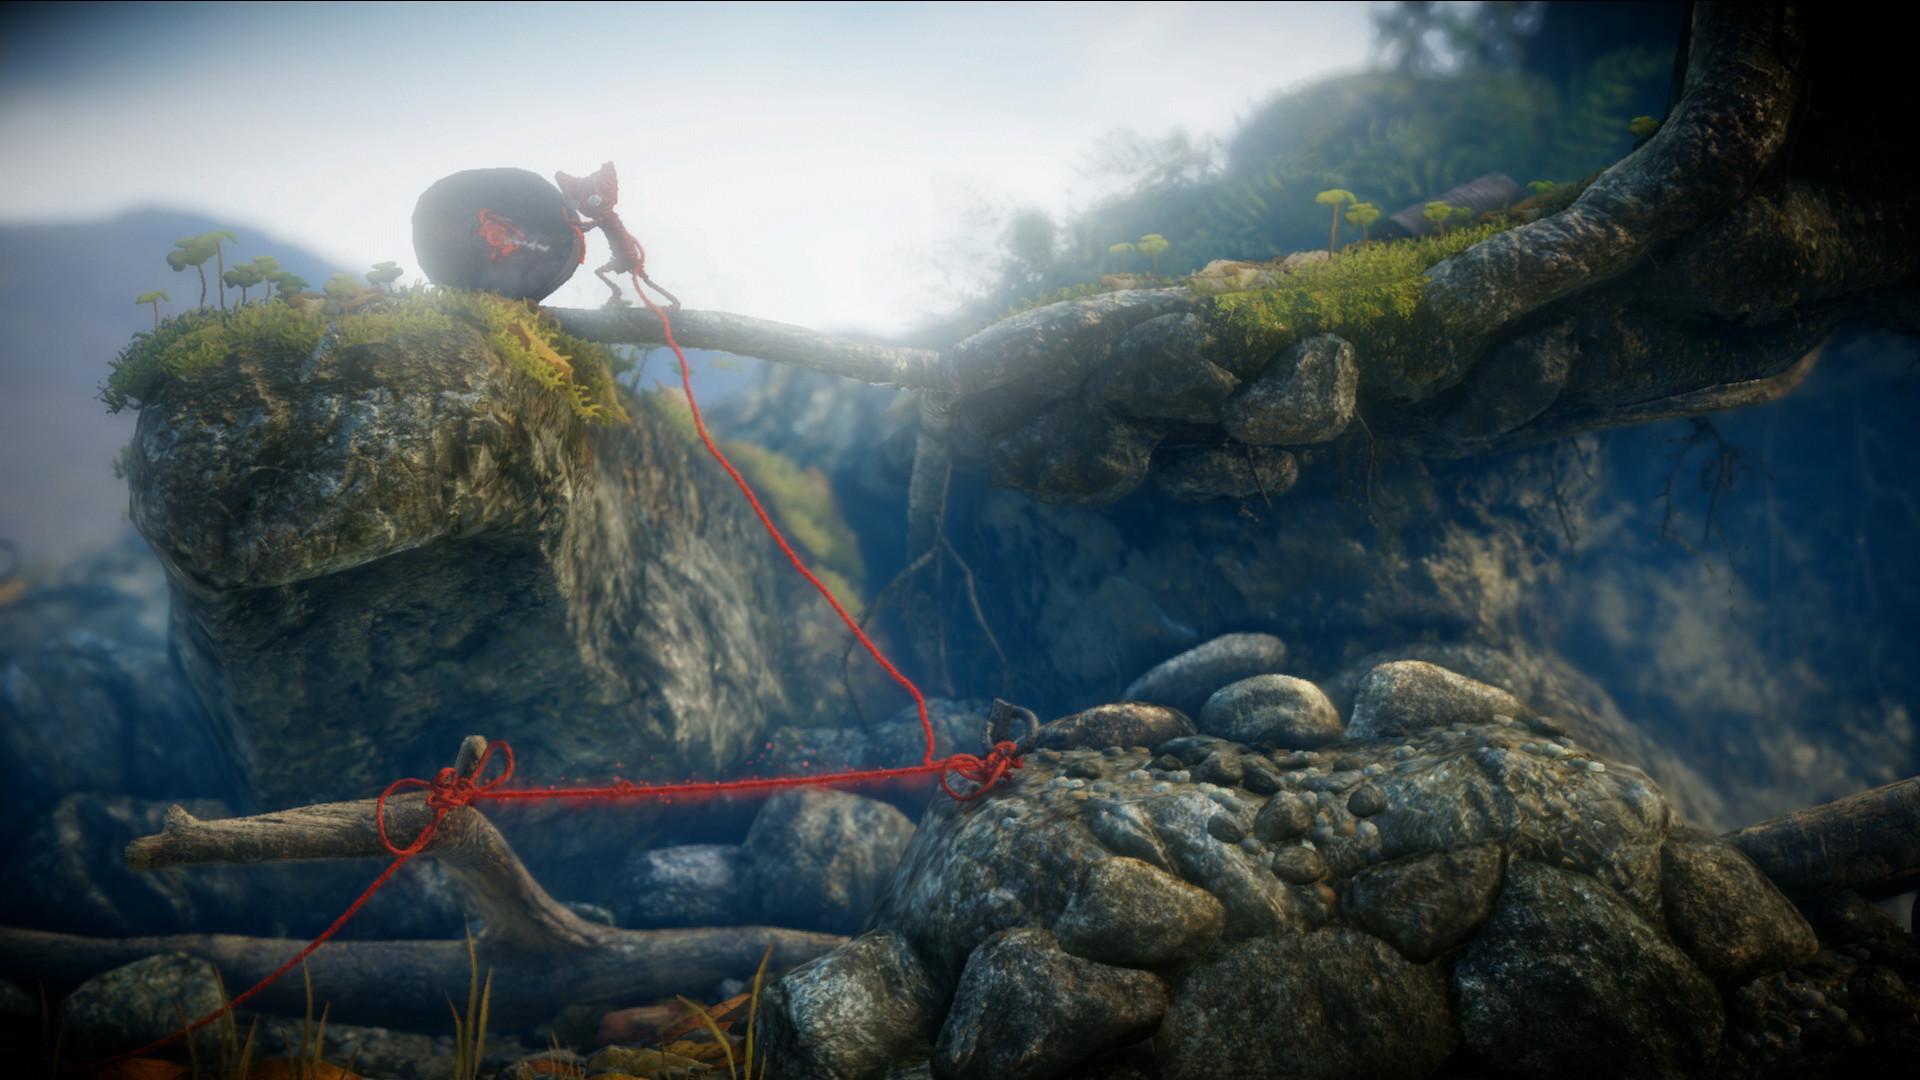 Unravel is cute and touching - and it'll drive you mad, too